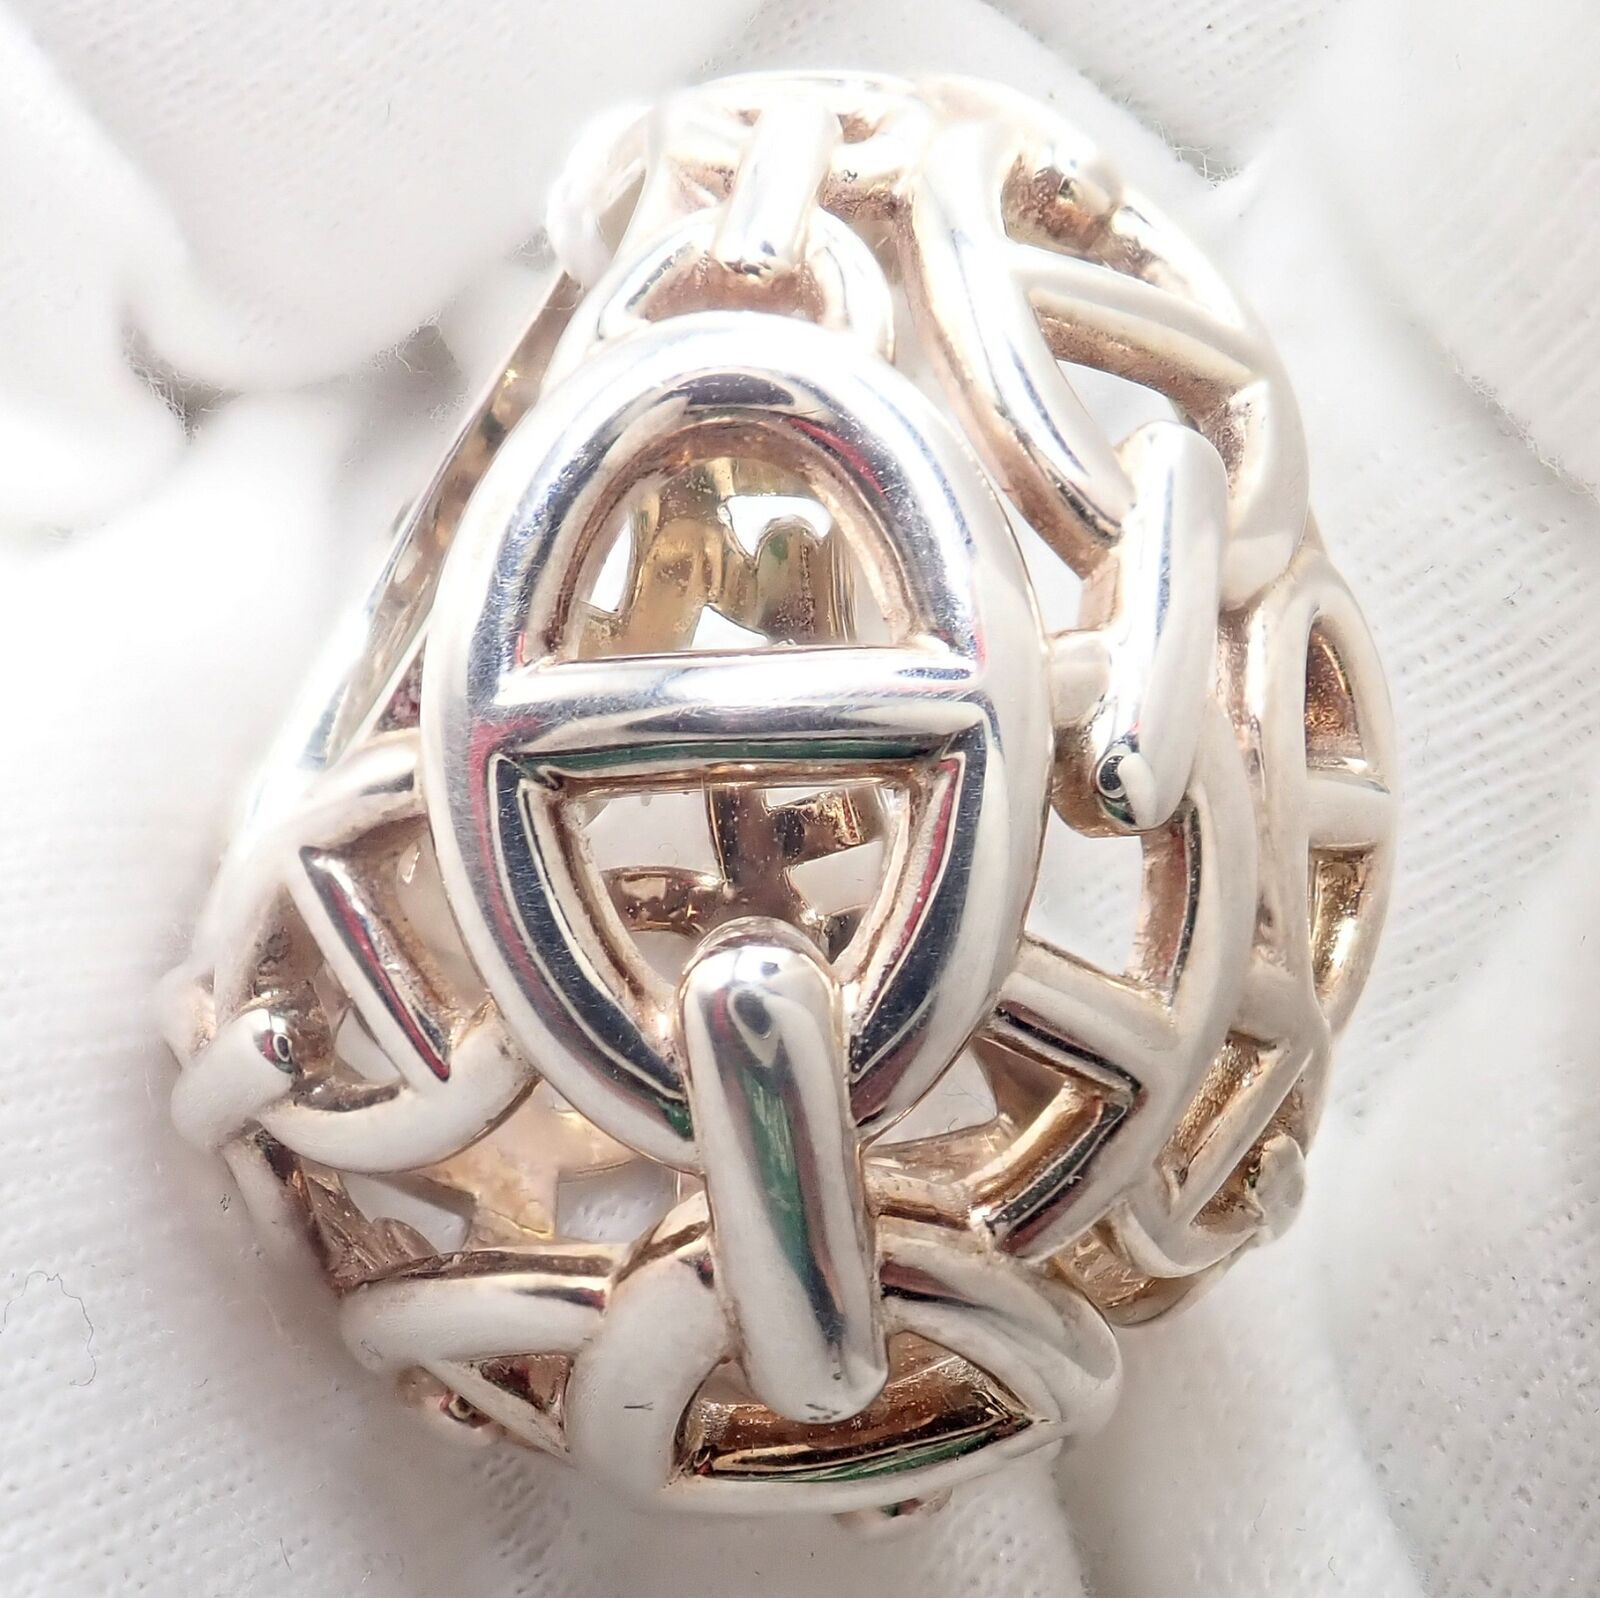 Hermes Jewelry & Watches:Fine Jewelry:Rings Authentic! Hermes Sterling Silver Large Chaine D'anchre Dome Ring sz 4.5